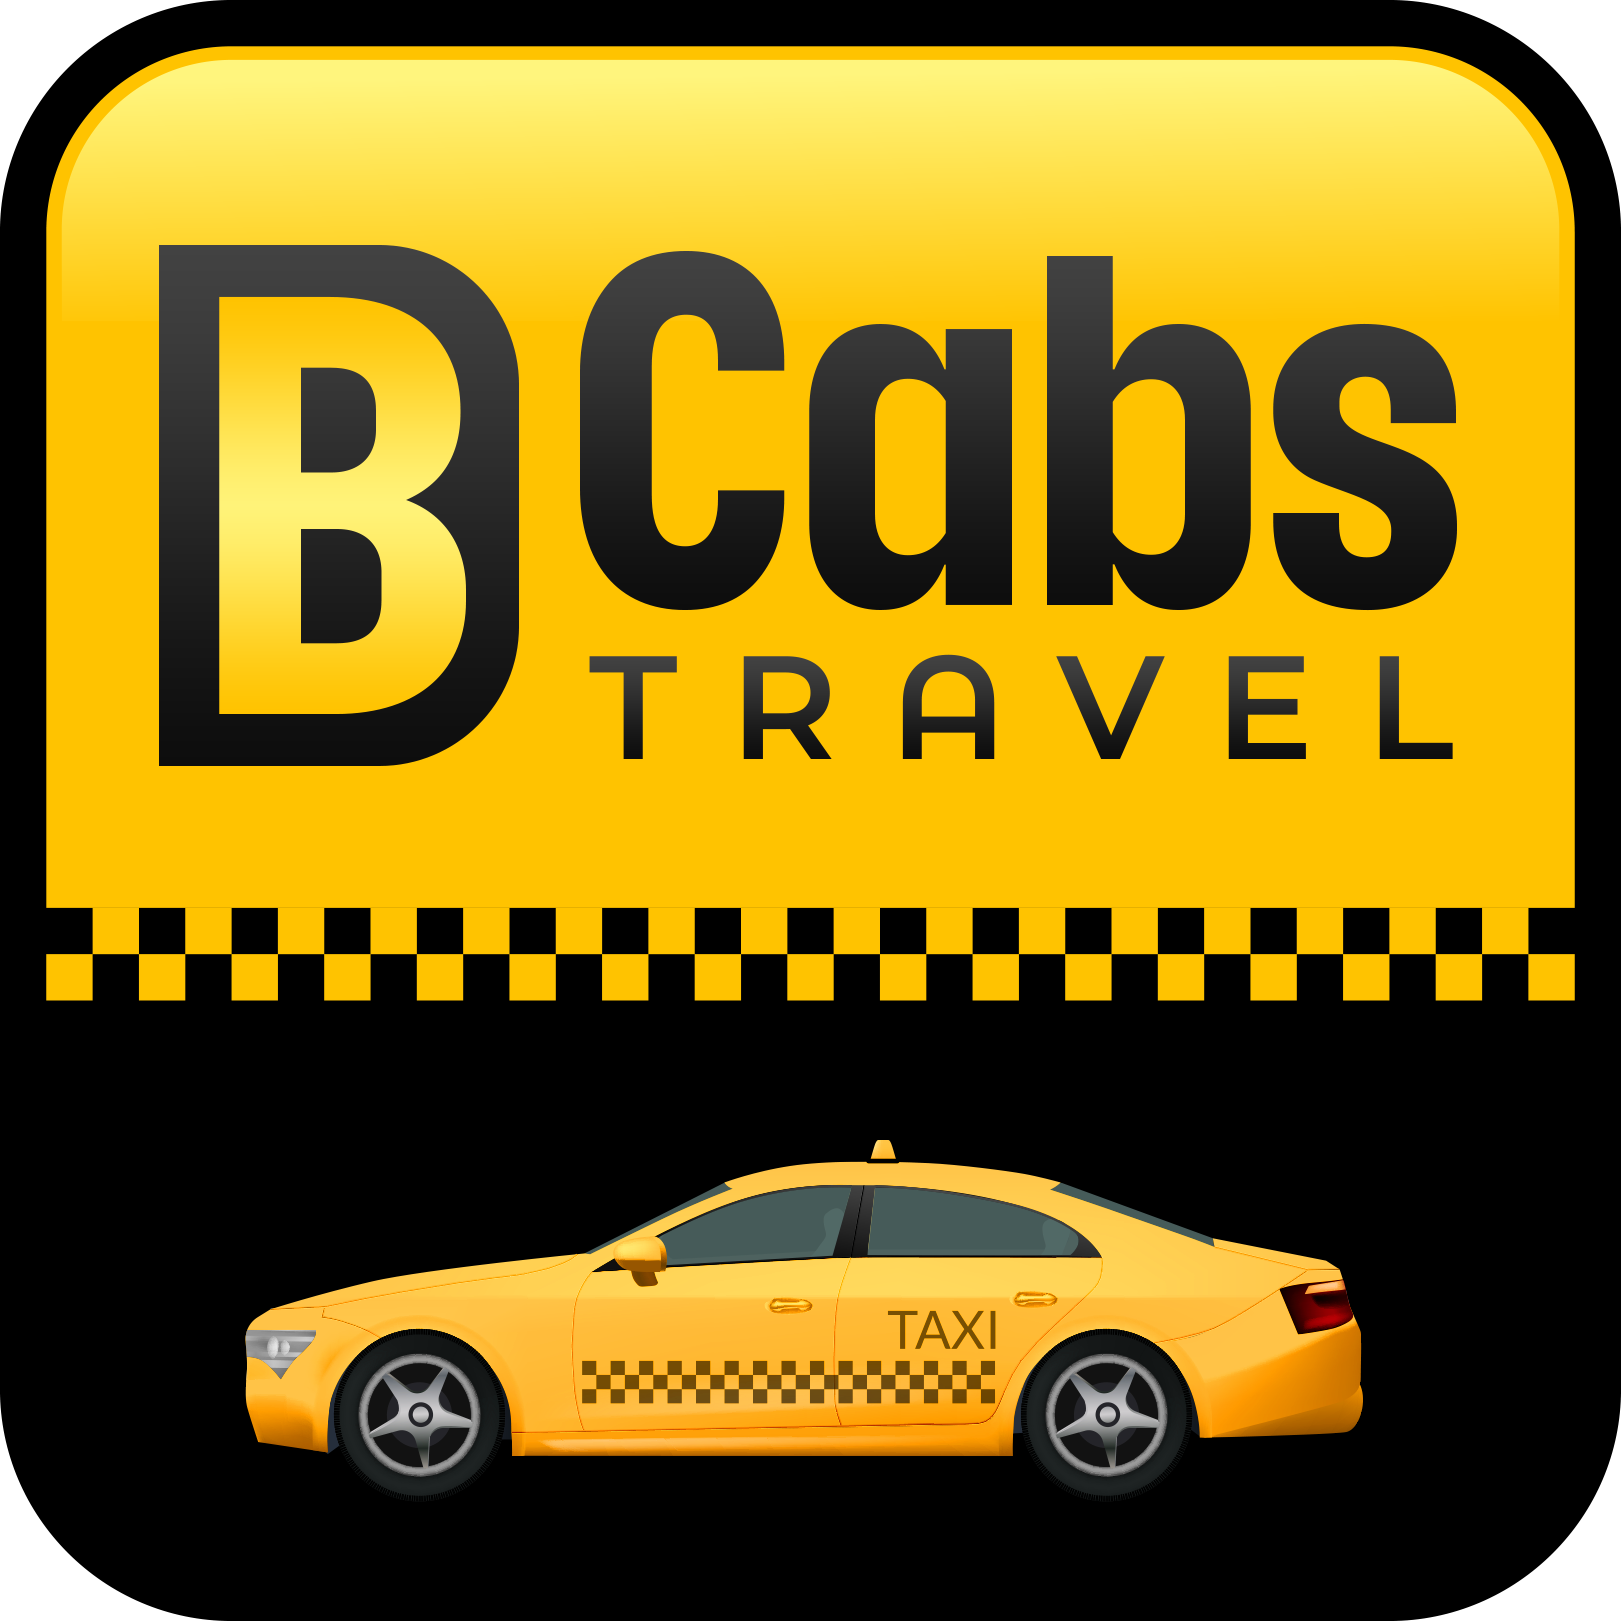 B-Cabs Travel | B-Cabs Travel Zirakpur | About Us | Our Fleet | Book ...